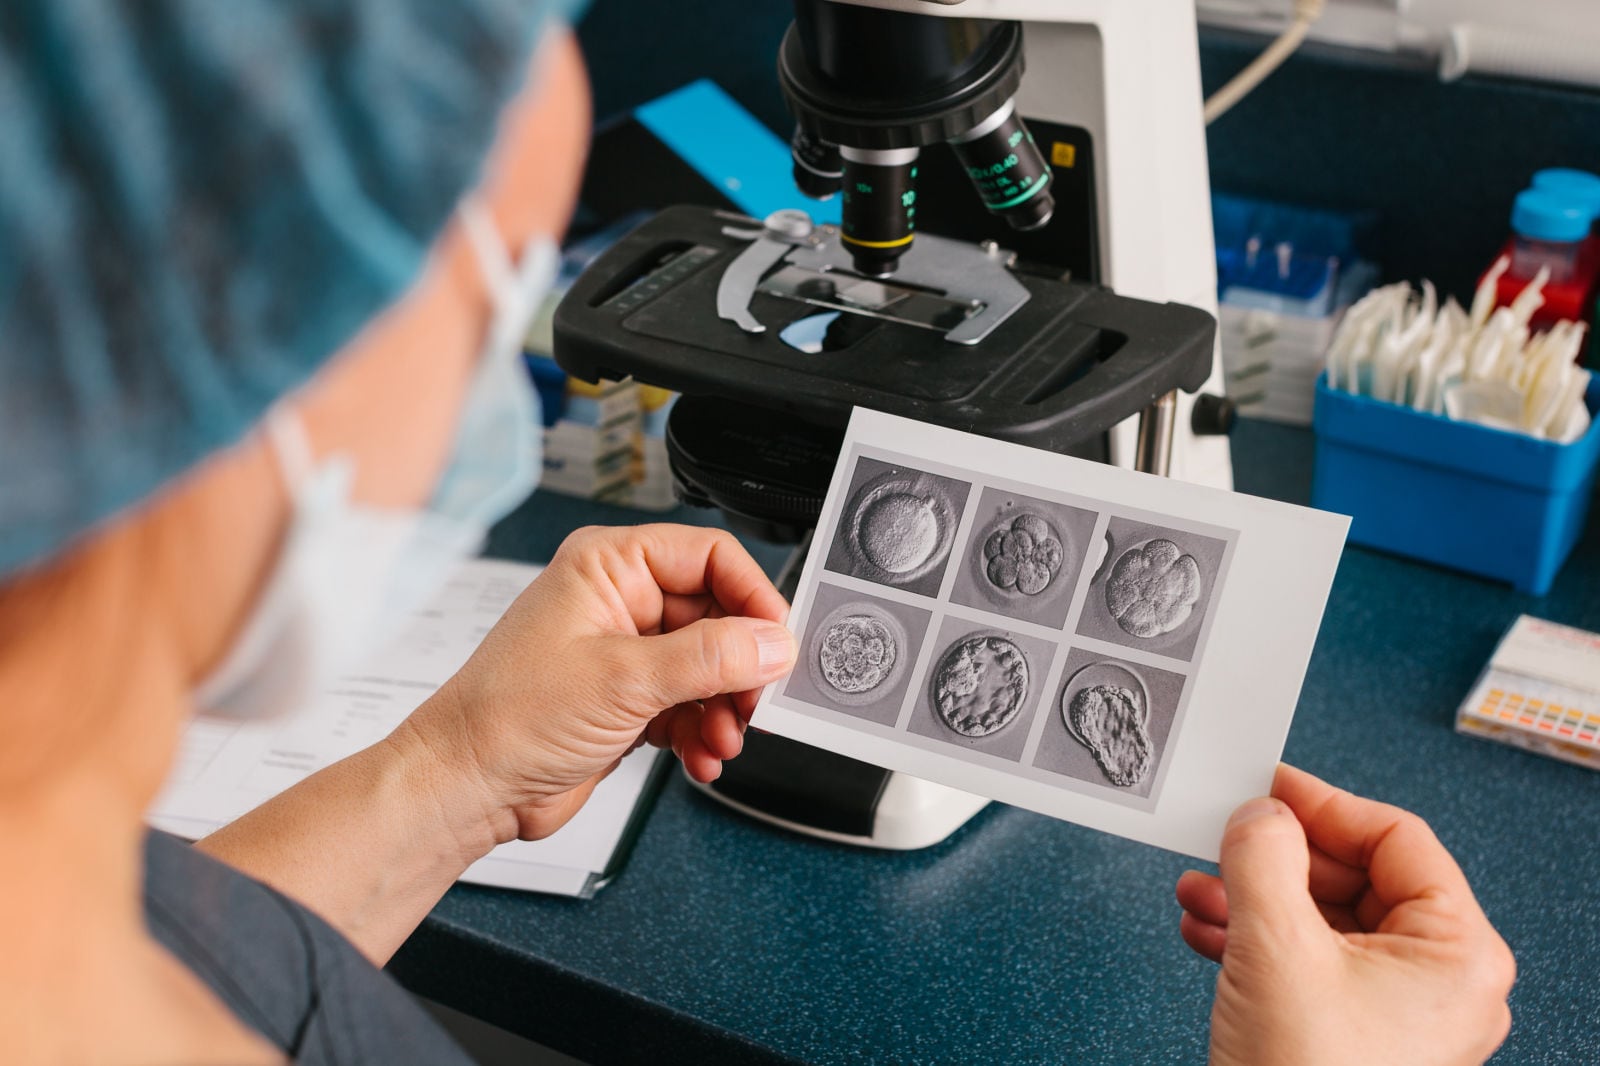 Healthcare specialist looking at embryo images